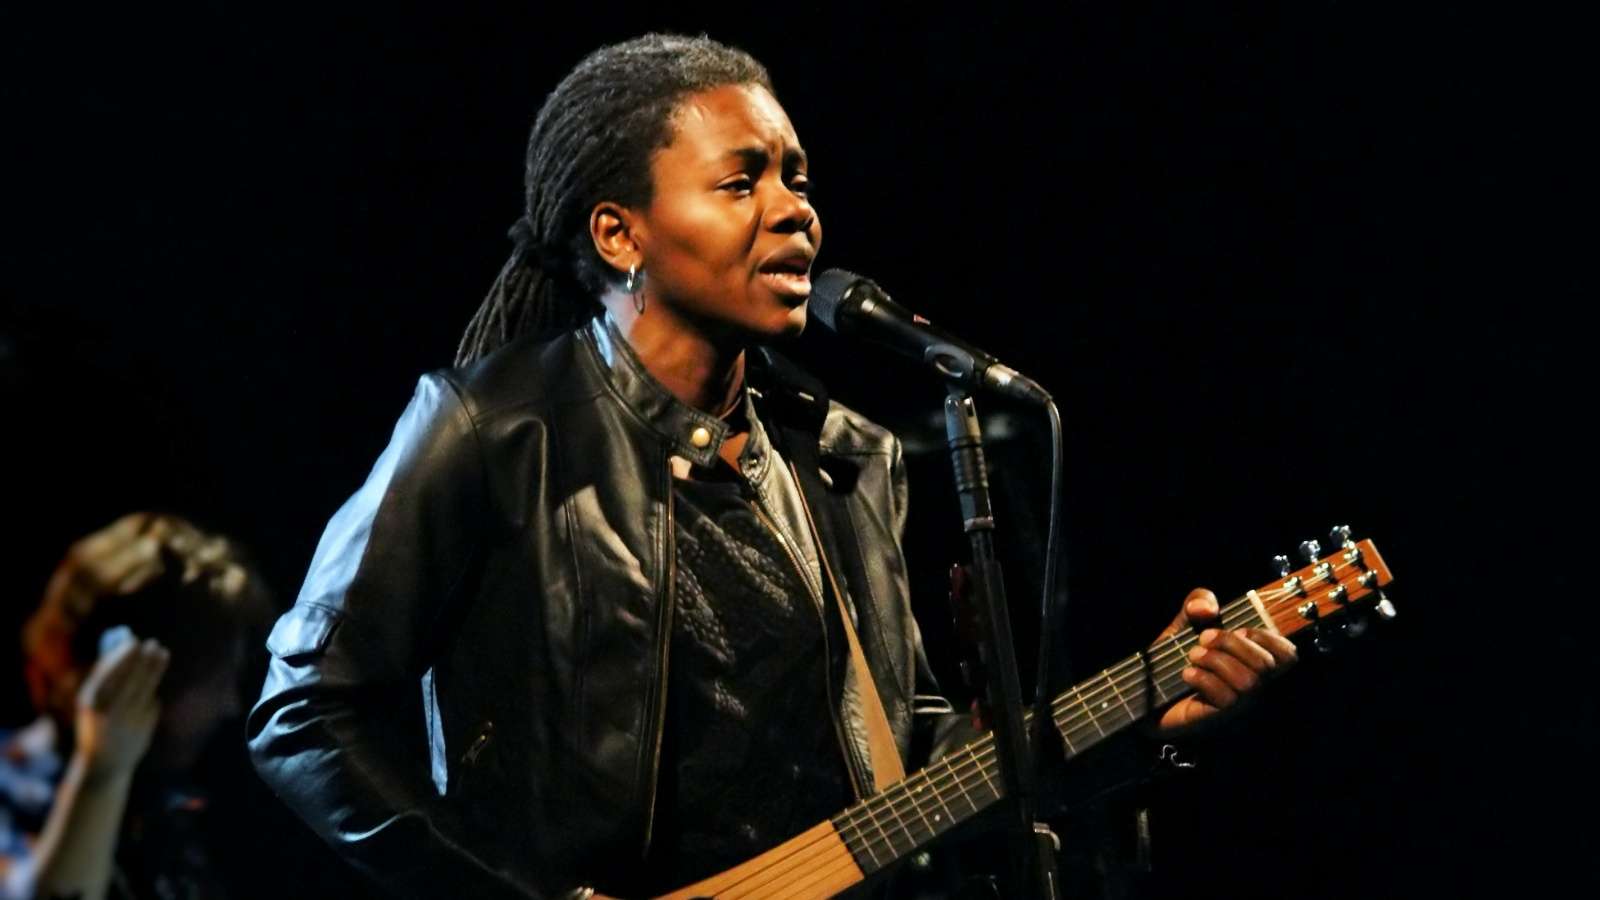 Tracy Chapman performing onstage at a concert with a guitar.